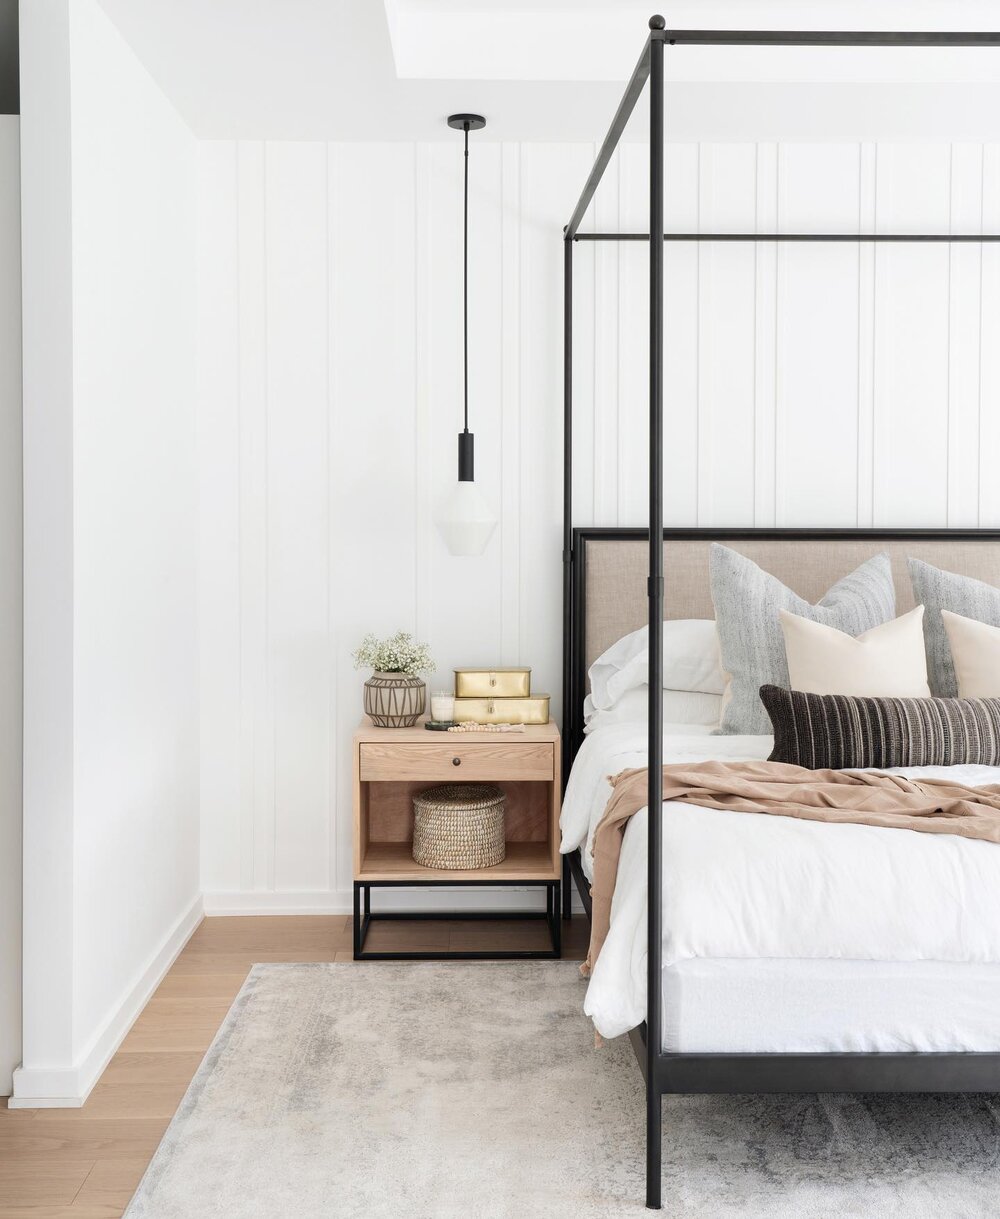 Loving lately: my favorite spaces of the week include this beautiful bedroom design with black canopy bed from leclair decor #home #style #bedroomdecor